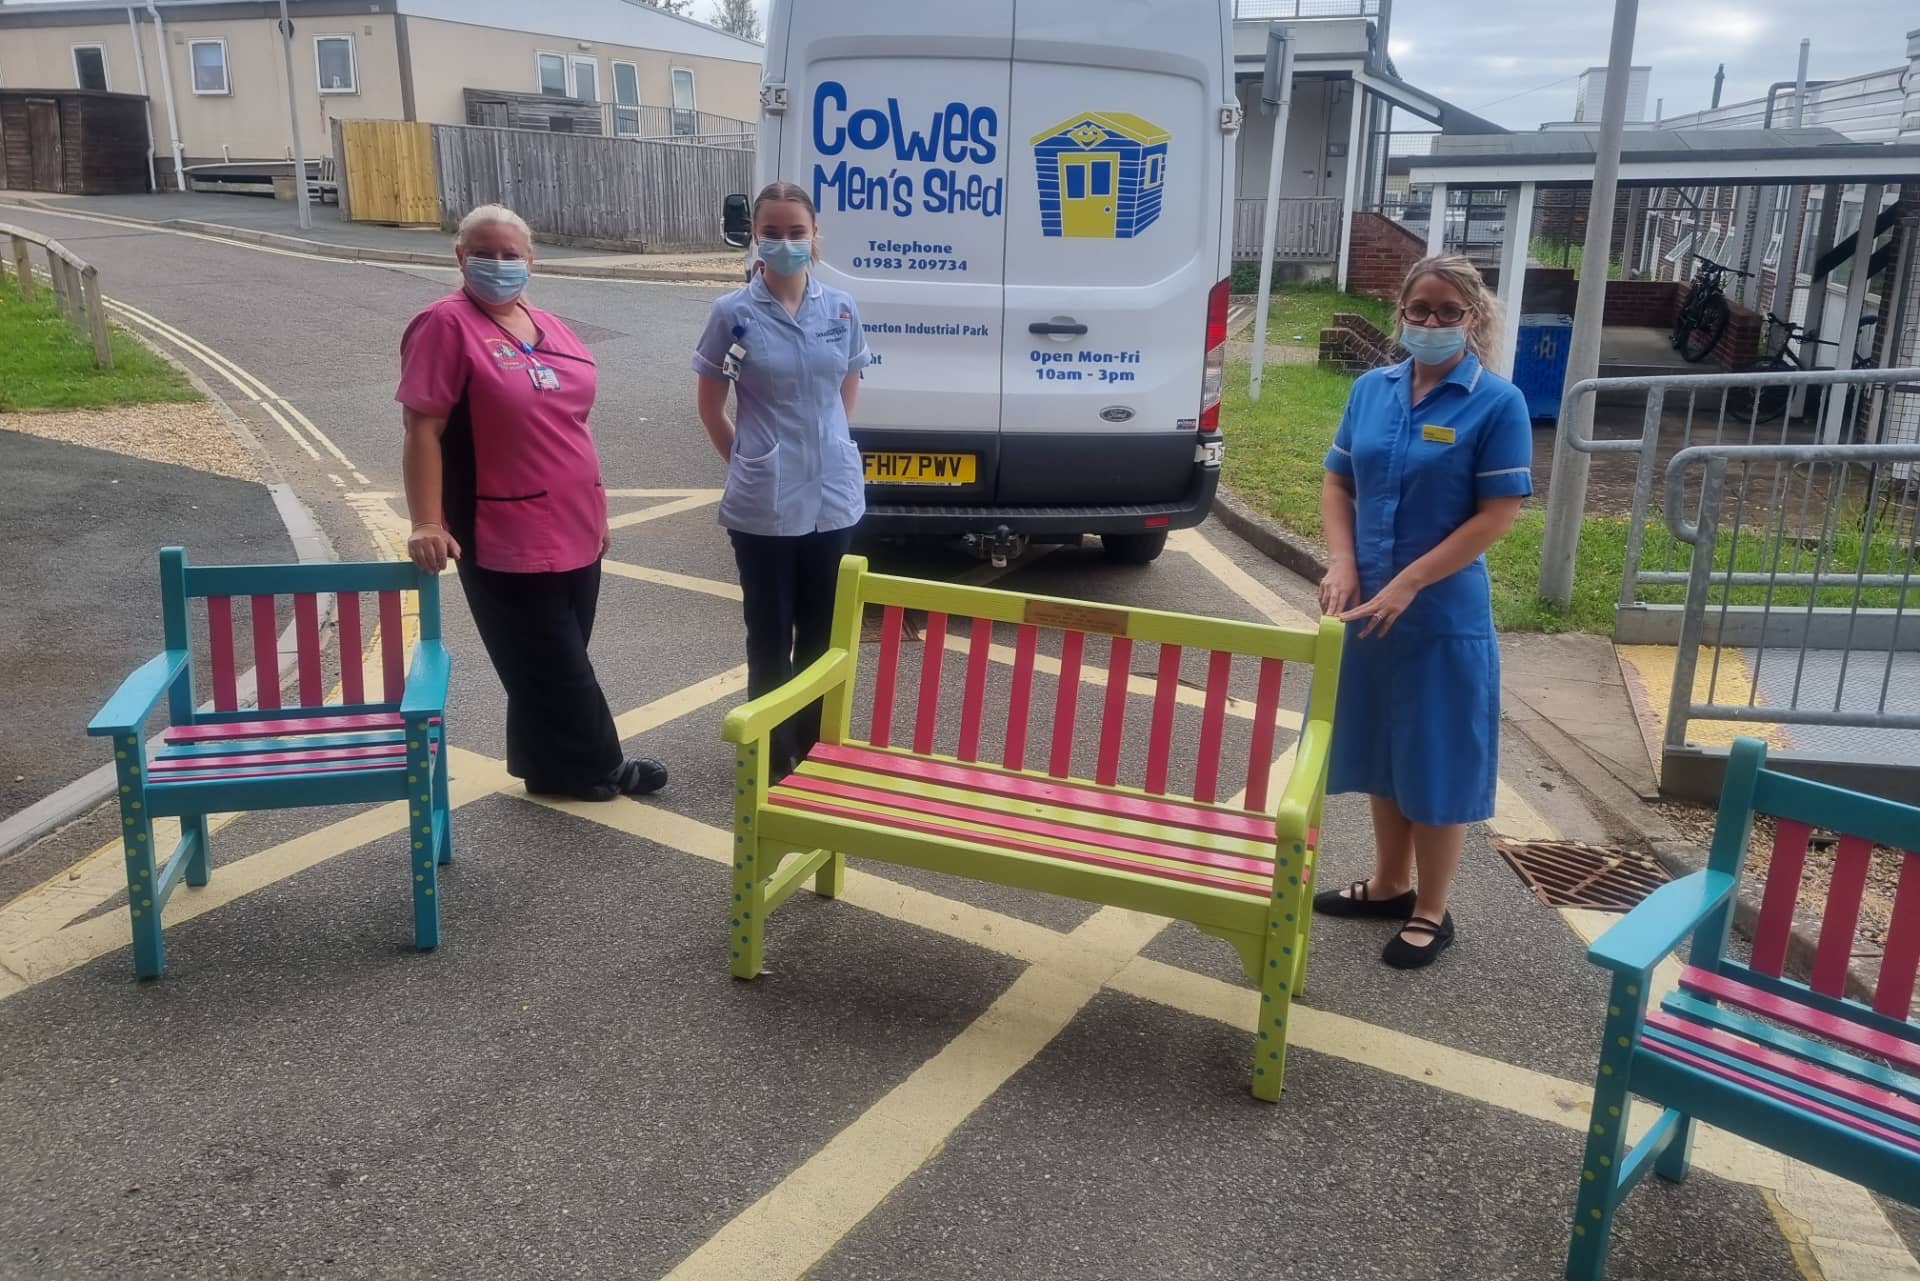 Colourful seating created for children #39 s ward by Cowes Men #39 s Shed